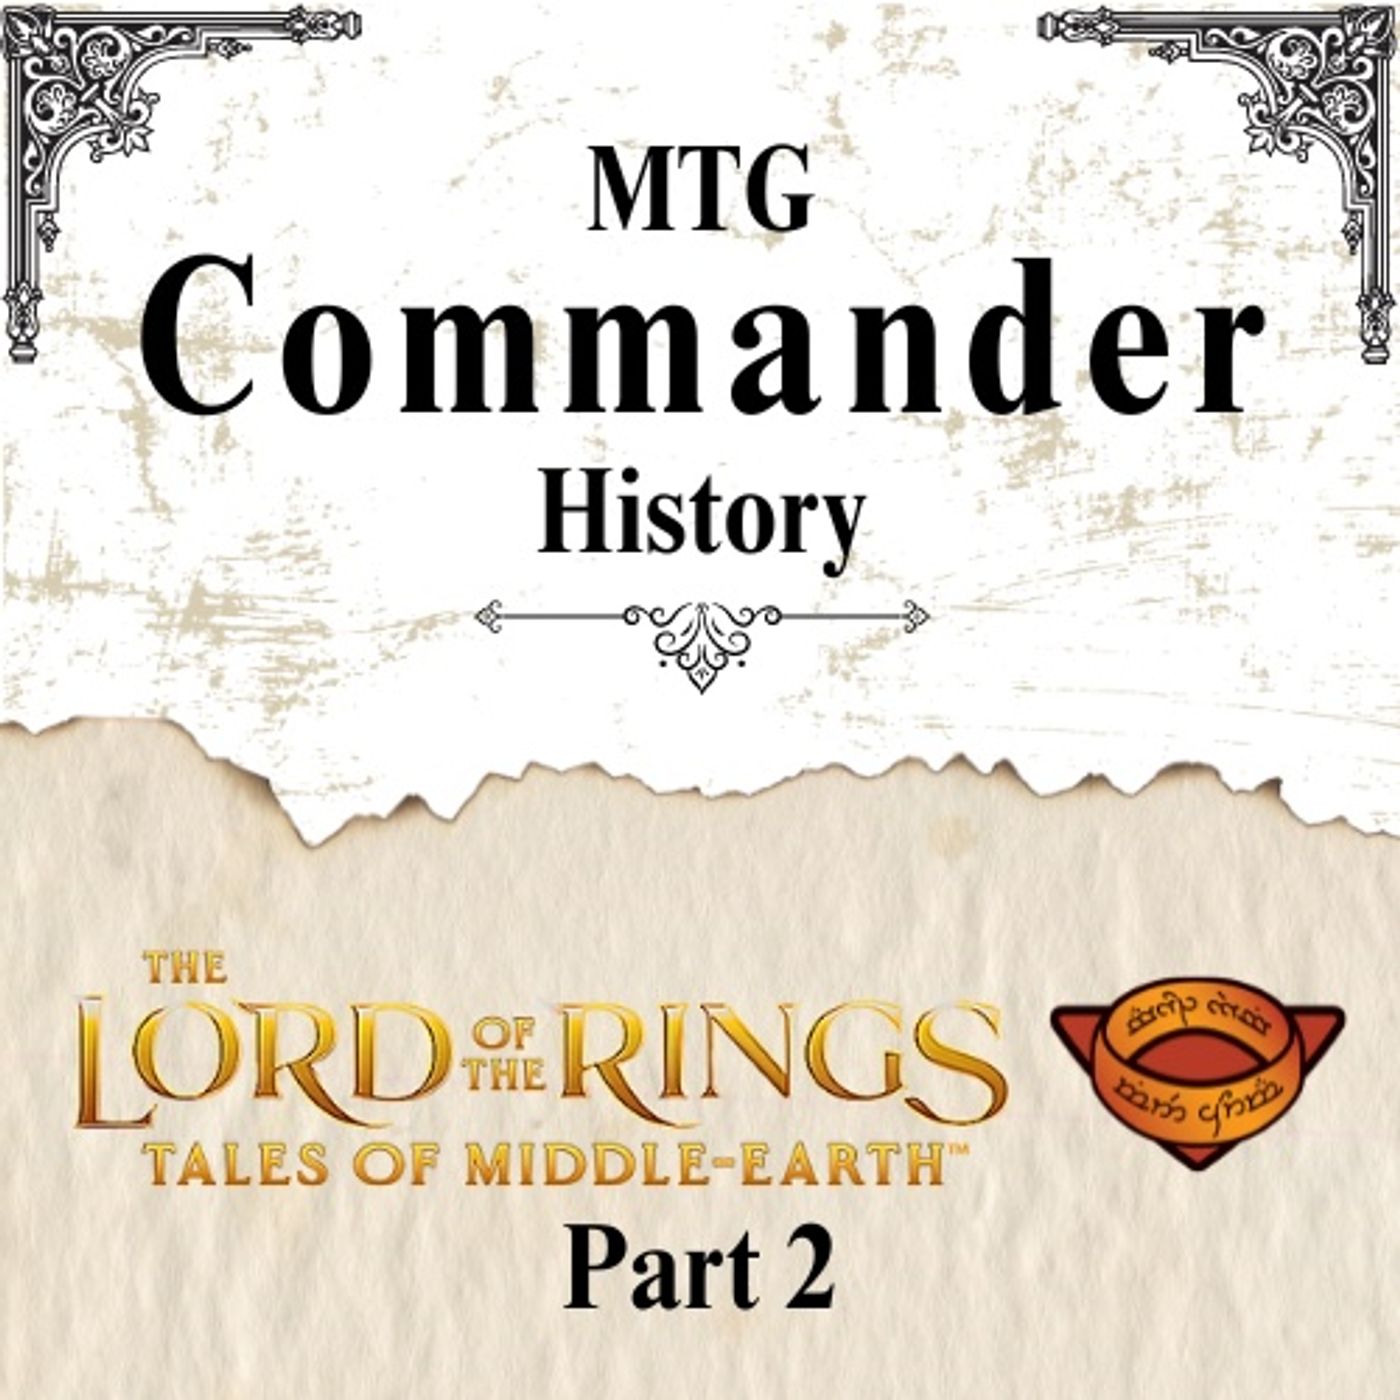 Commander History 7 - Lord of the Ring: Tales of Middle-earth - Part 2